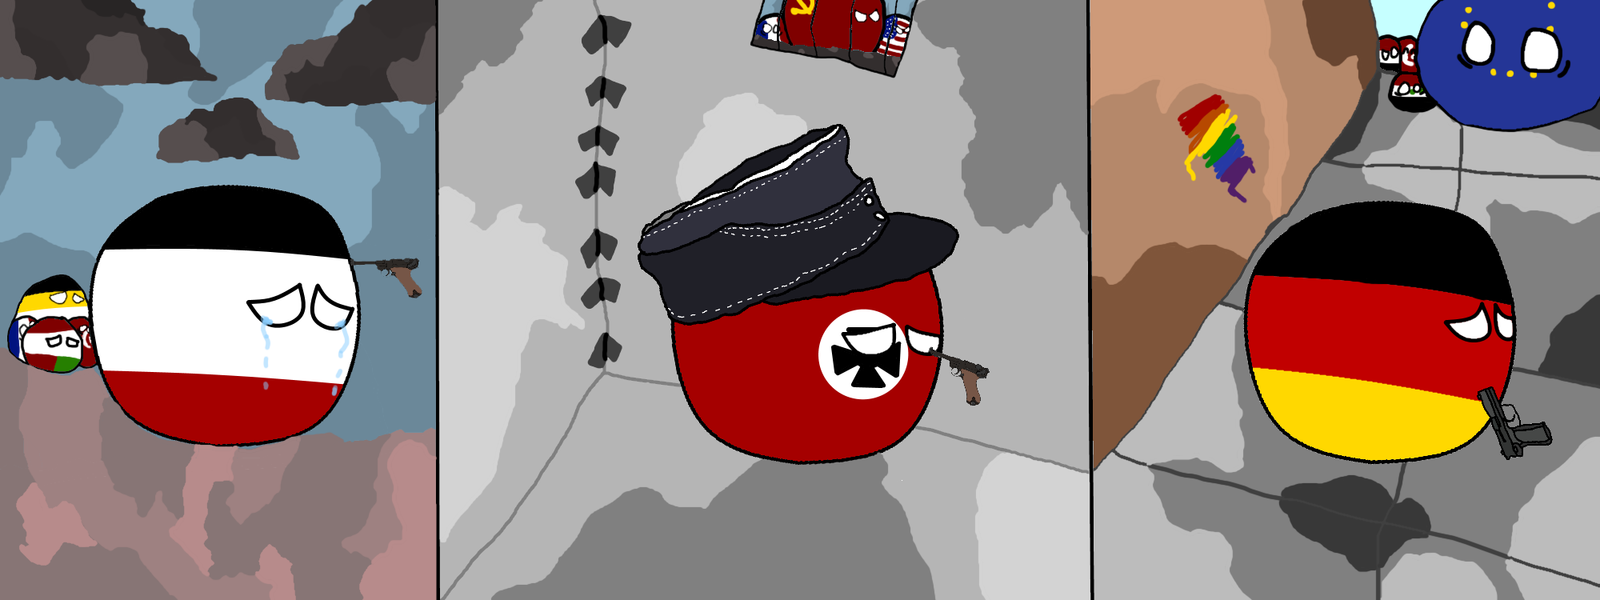 Germany - My, Suicide, Germany, German Empire, FRG, European Union, Third Reich, Countryballs